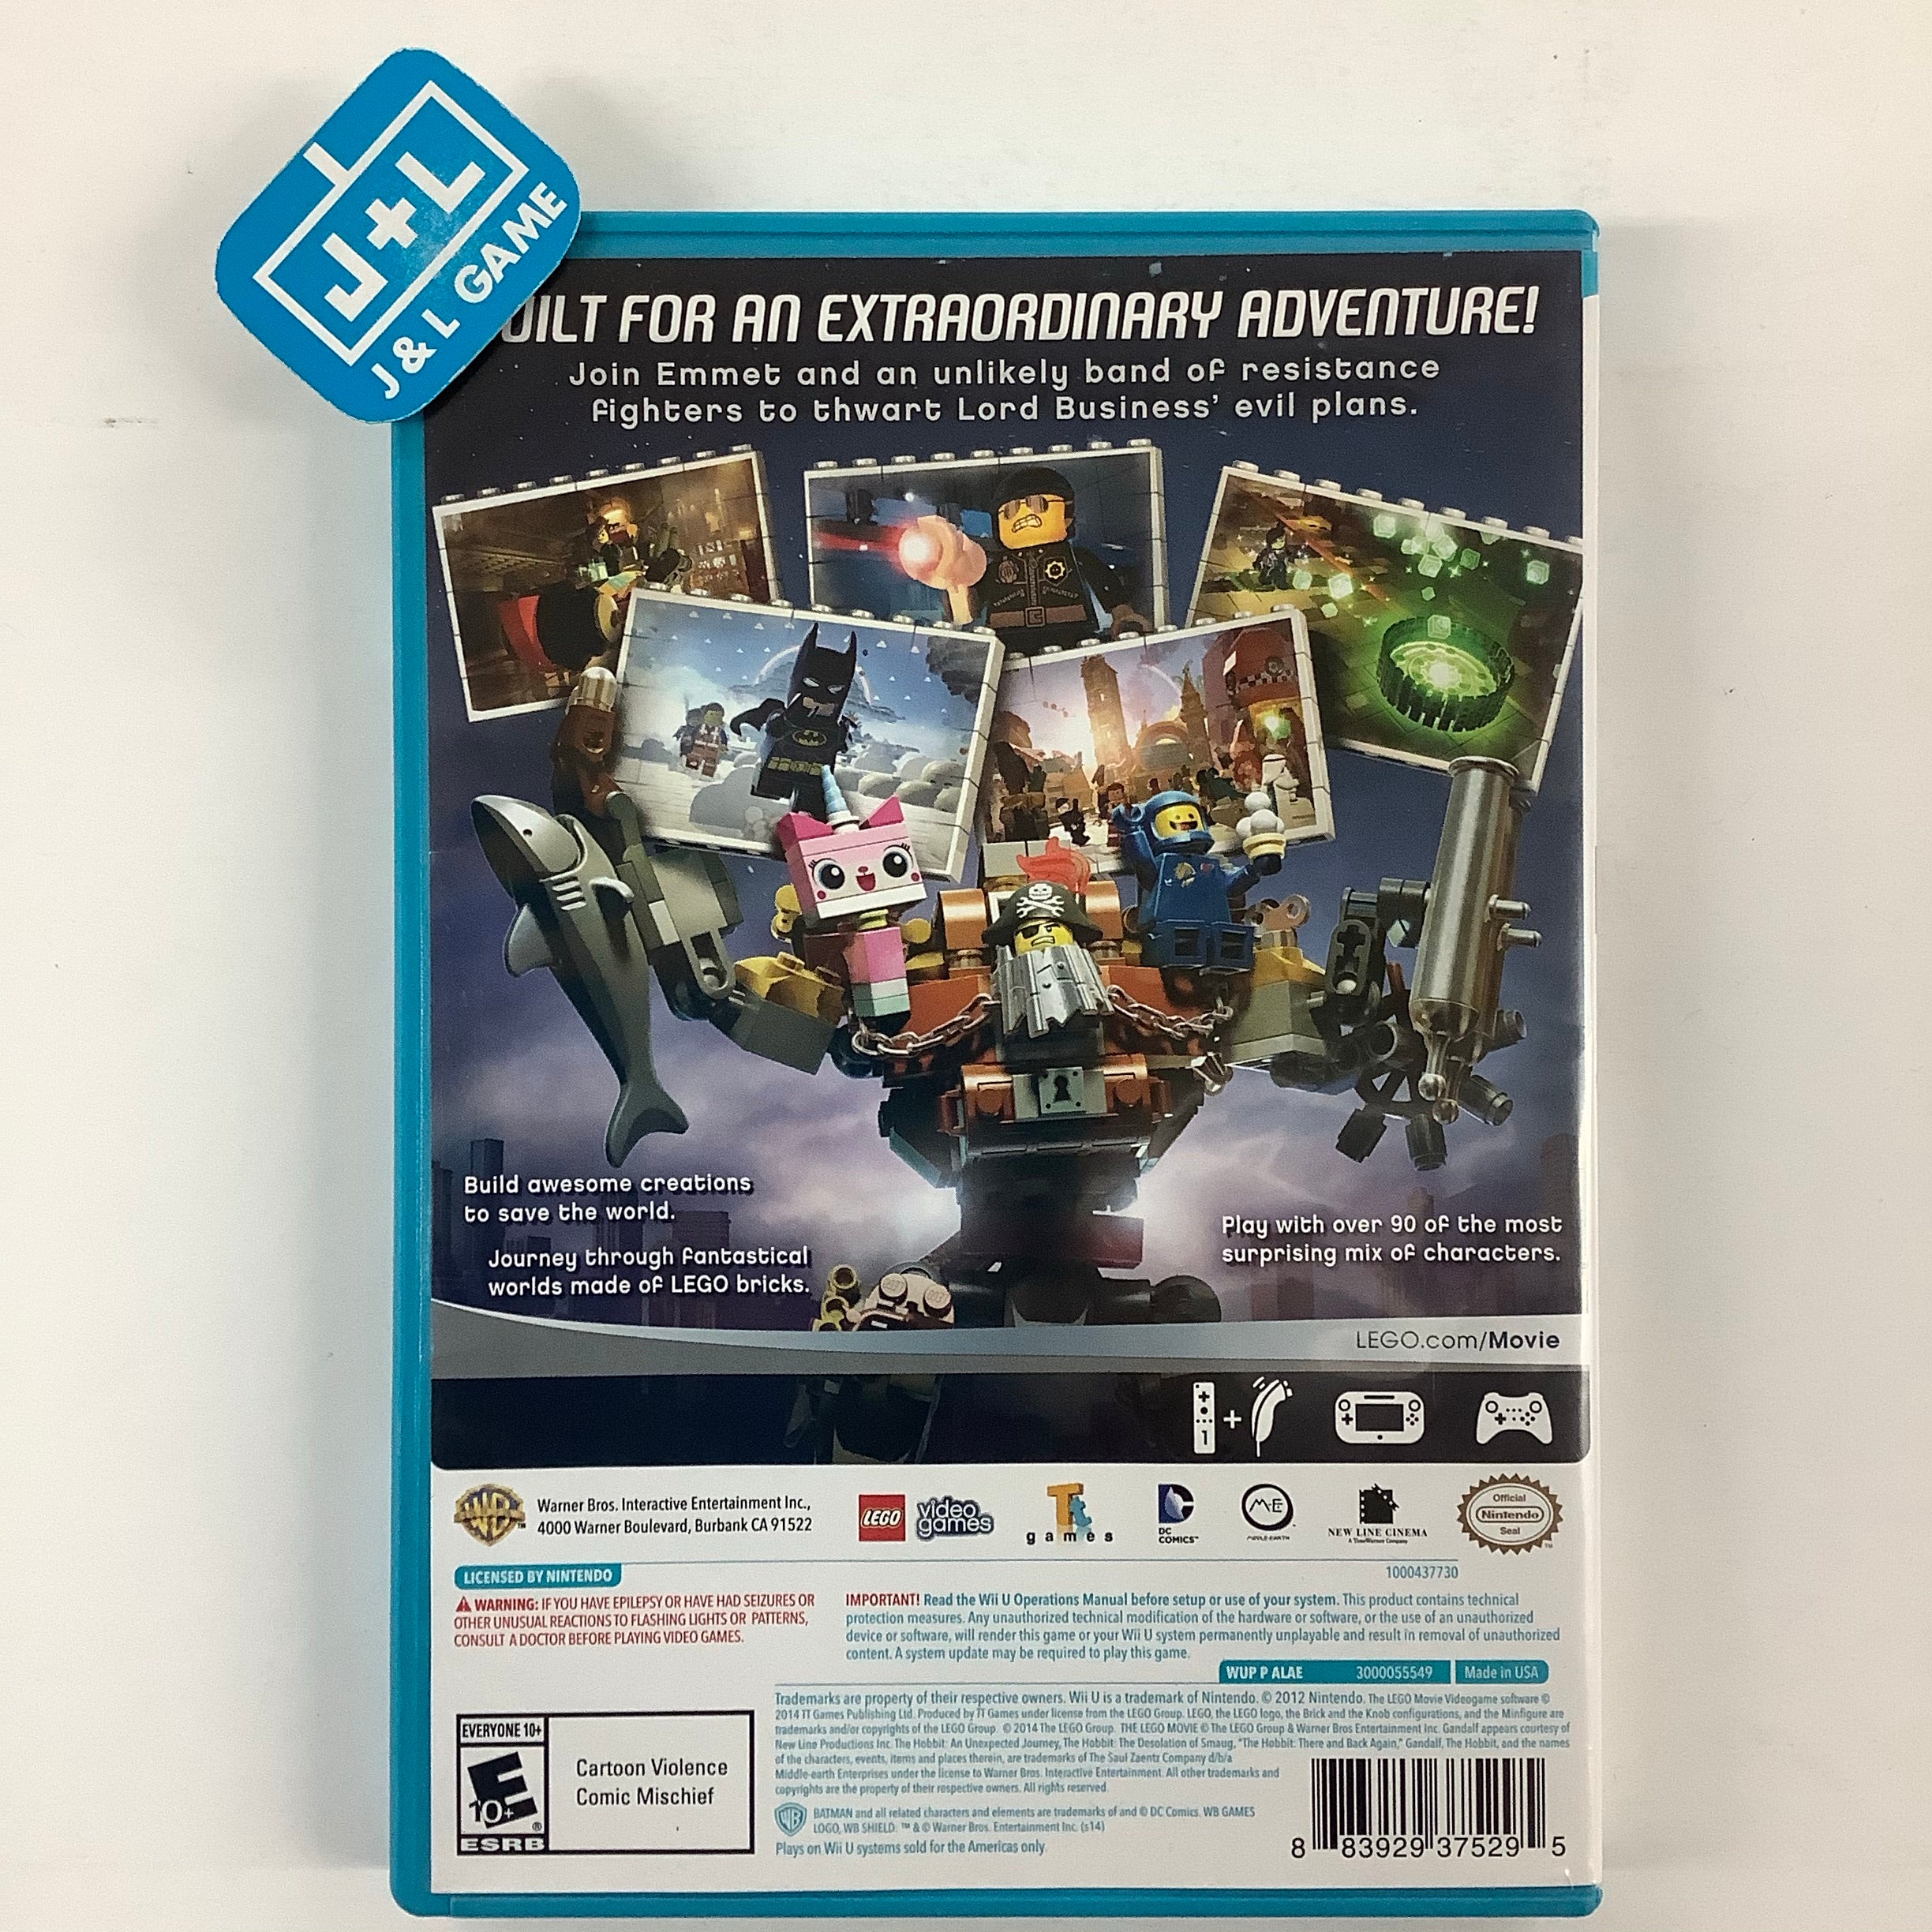 The LEGO Movie Videogame - Nintendo Wii U [Pre-Owned] Video Games Warner Bros. Interactive Entertainment   